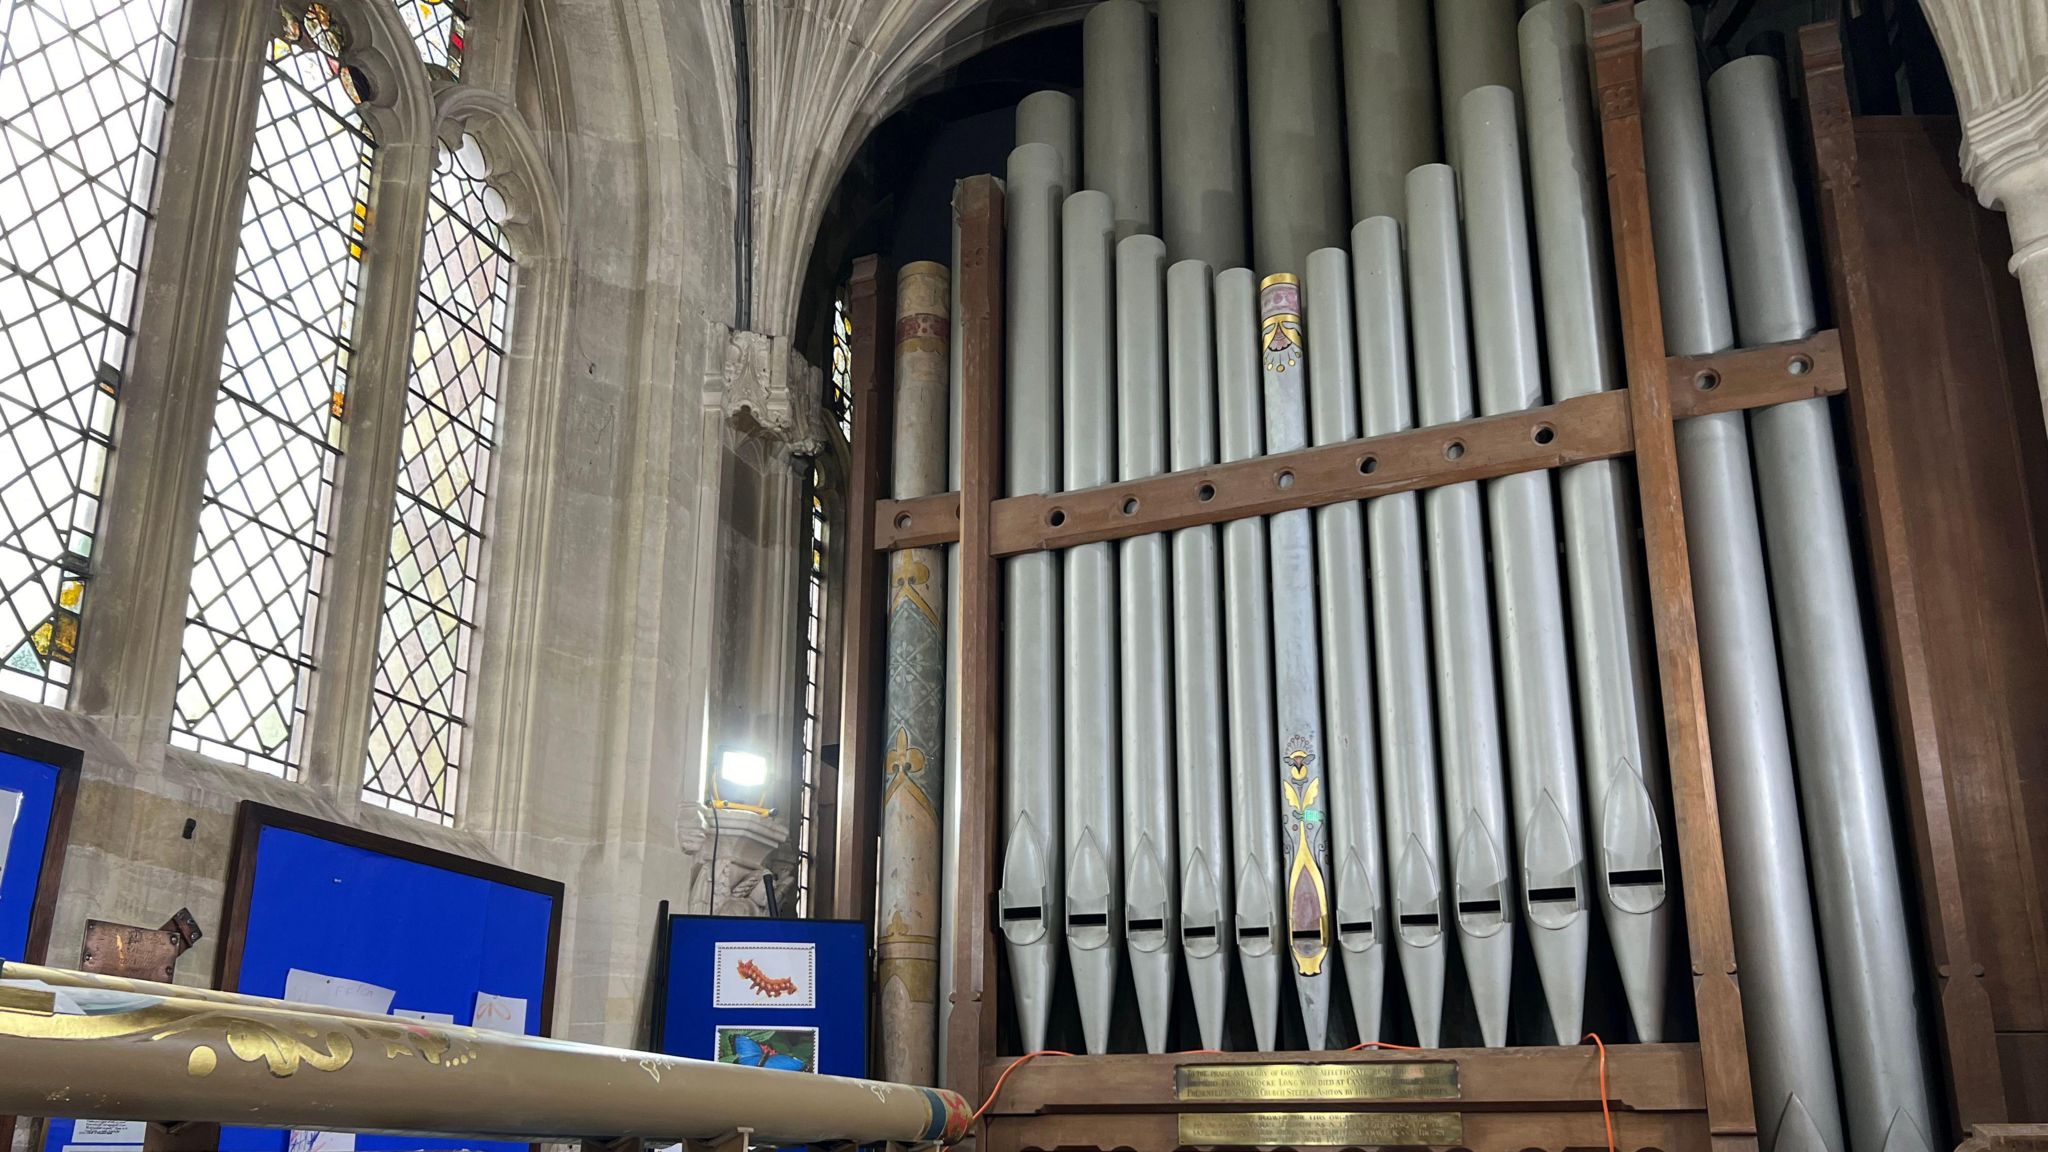 Church organ with mostly grey pipes, but one or two with decoration uncovered